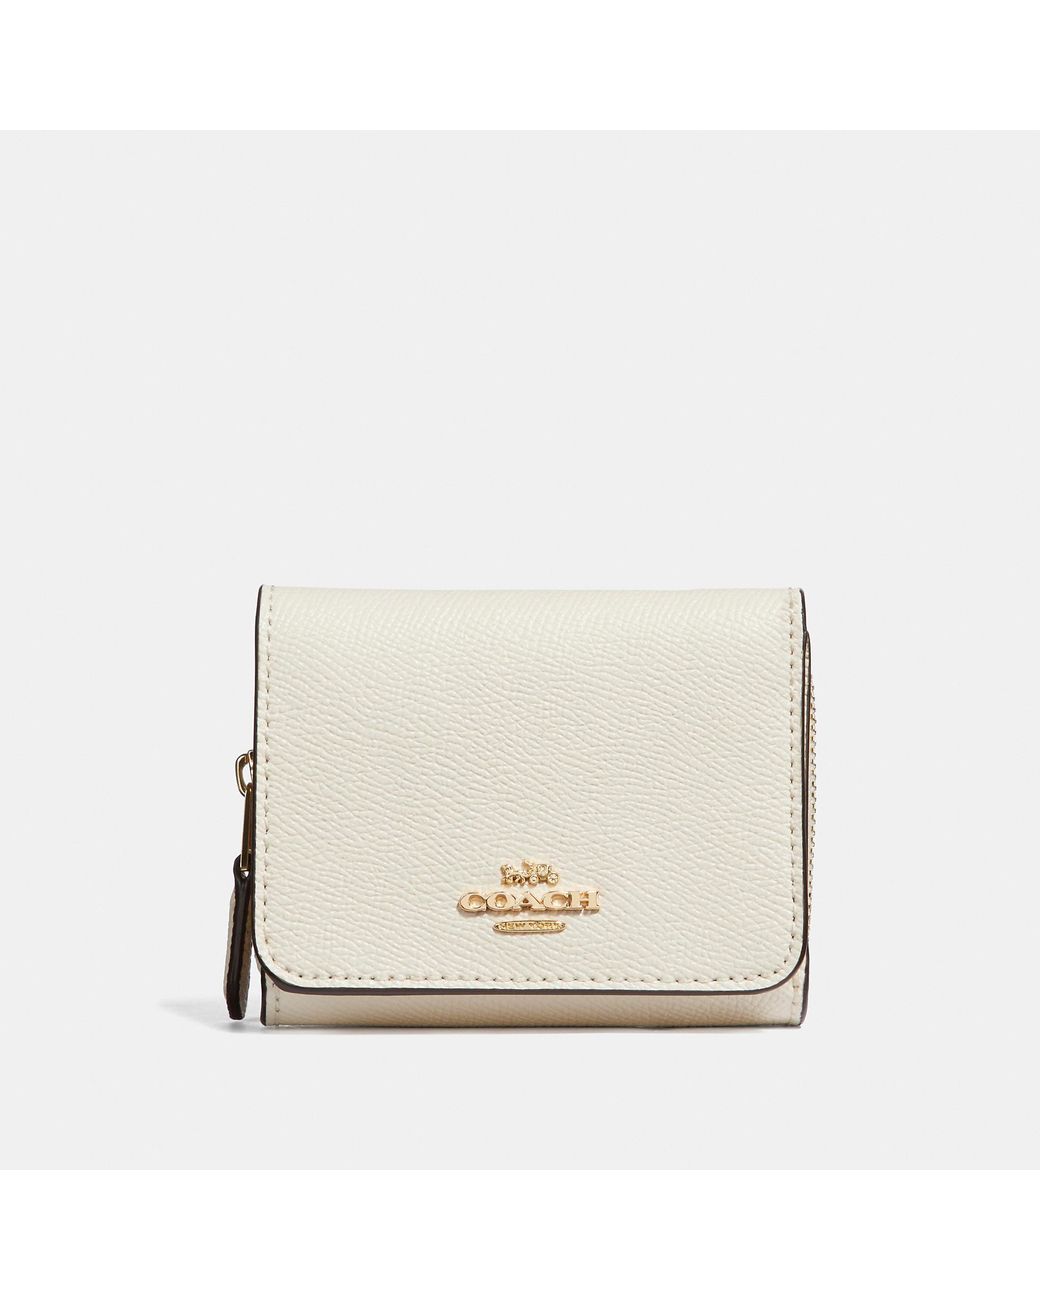 COACH Small Trifold Wallet in Metallic